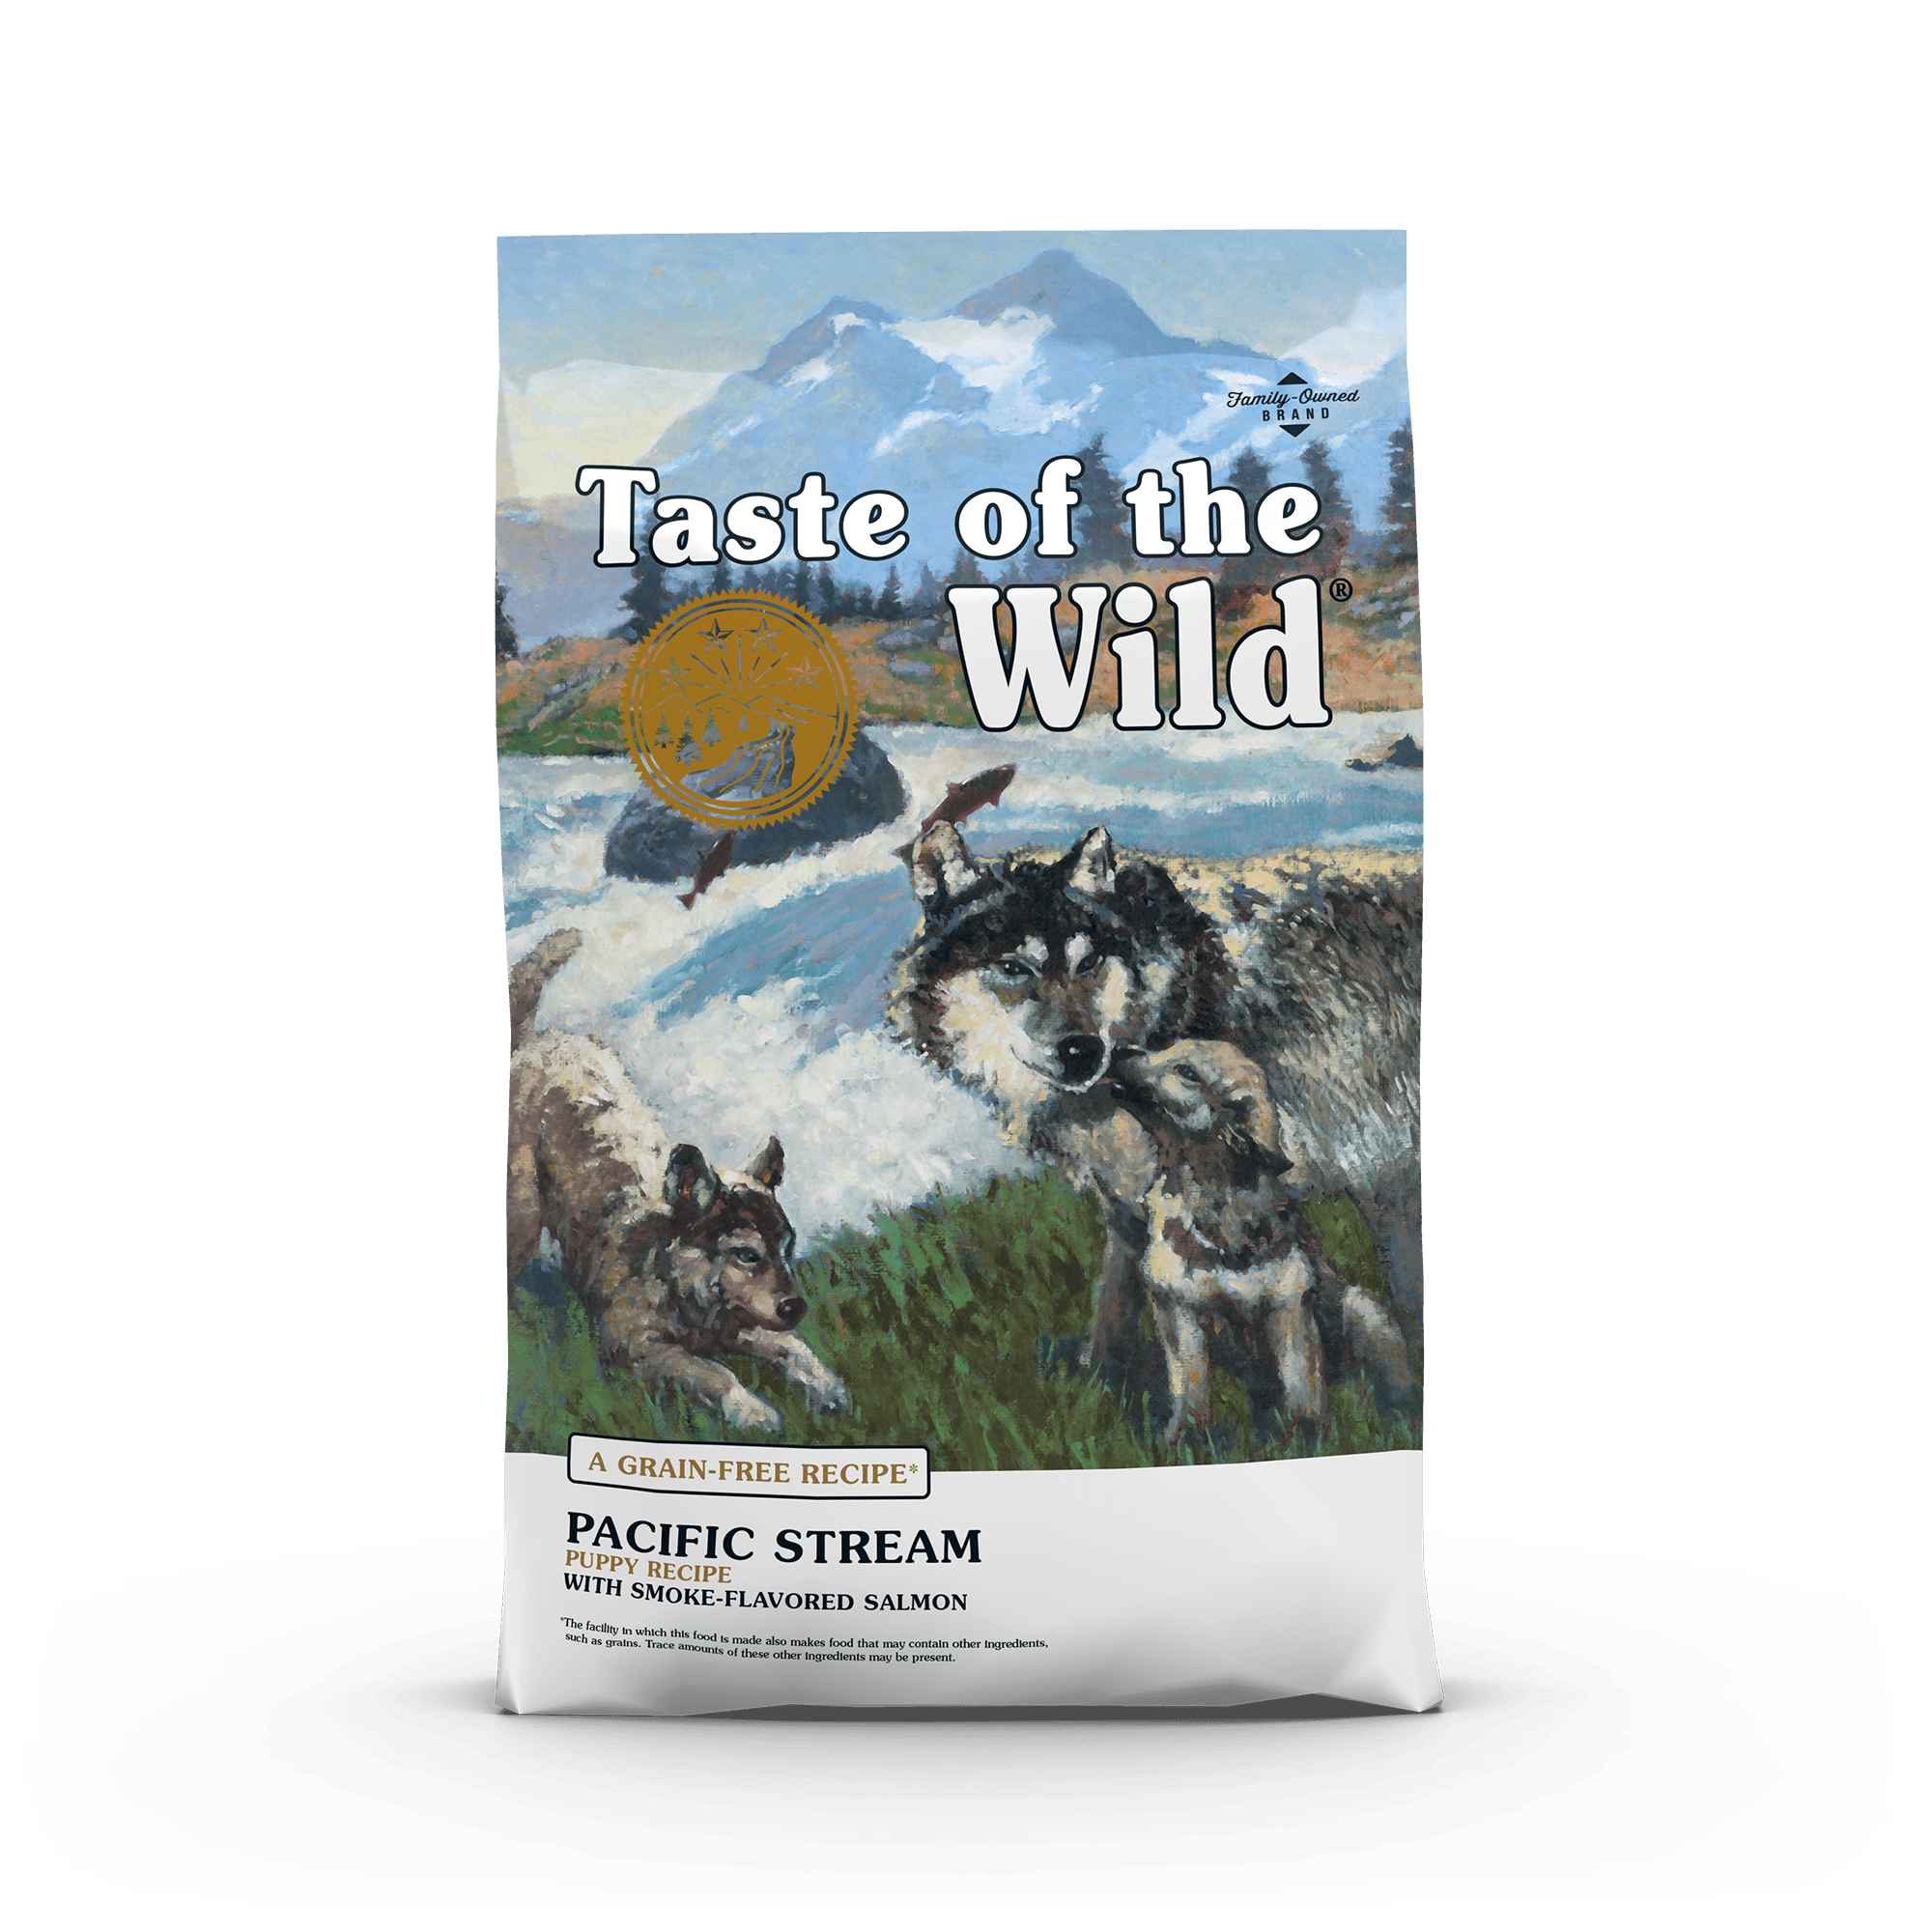 Taste of the Wild Grain-Free Pacific Stream Puppy Recipe with Smoke-Flavored Salmon package